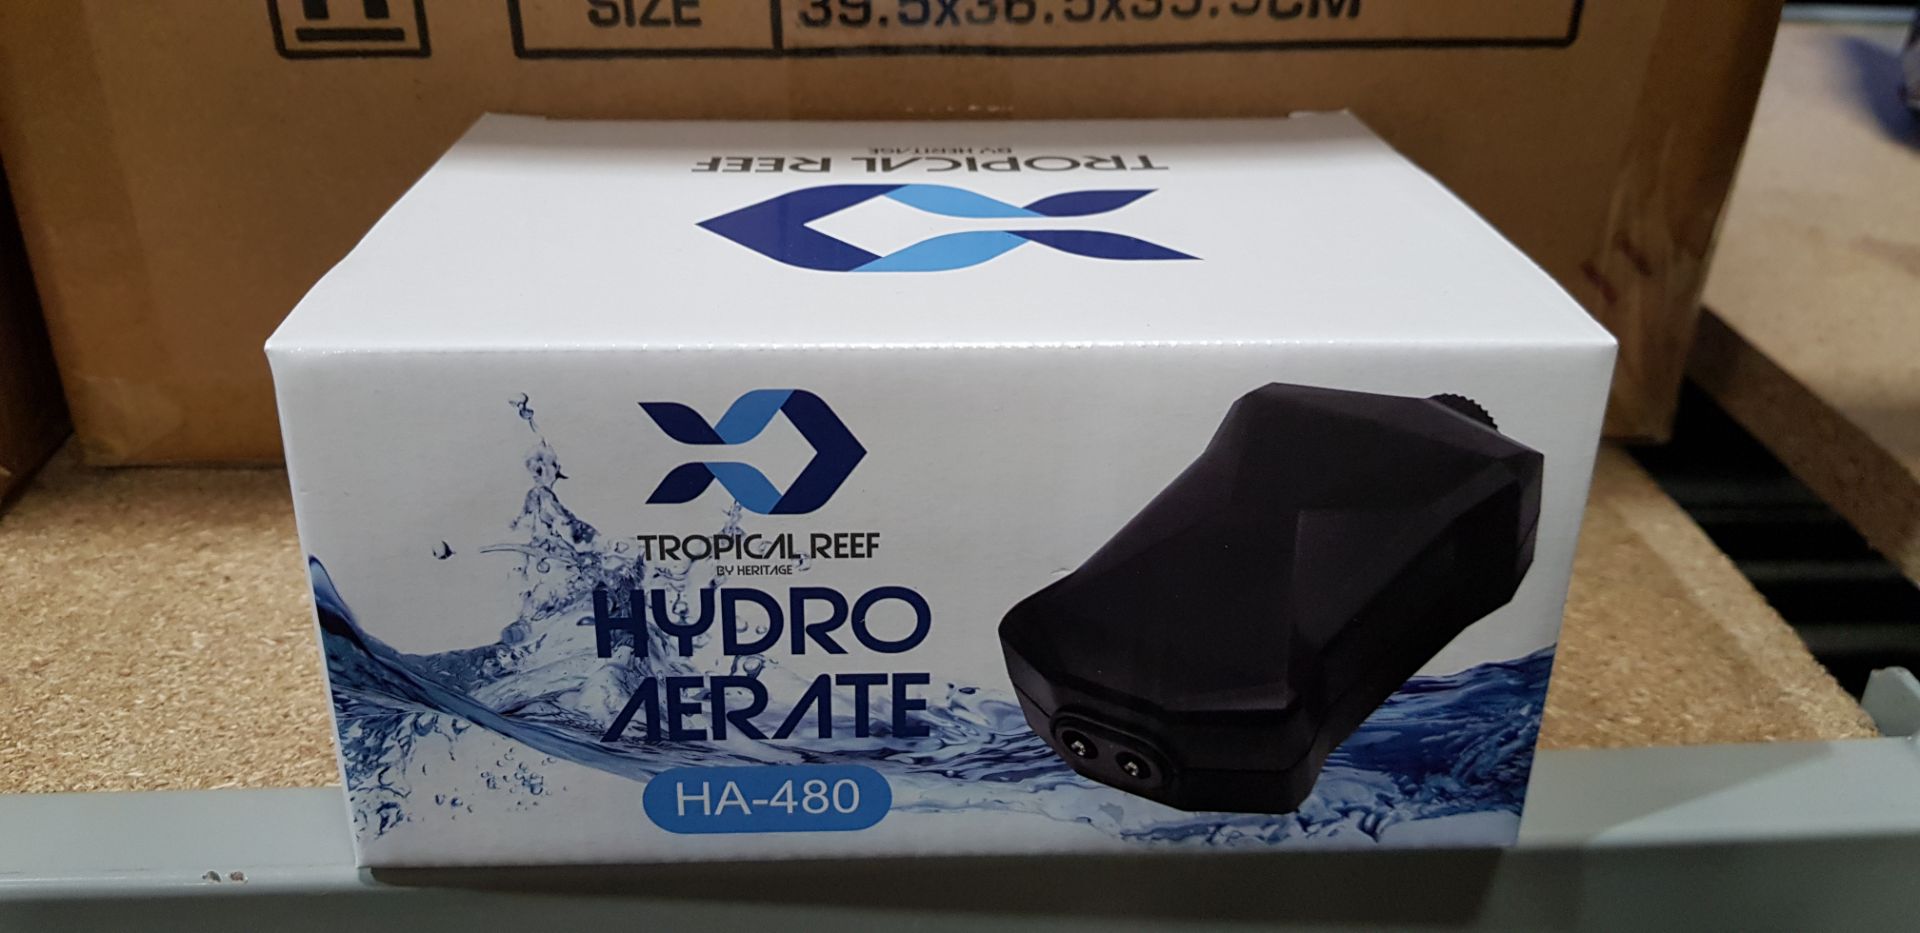 23 X BRAND NEW TROPICAL REEF BY HERITAGE HYDRO AERATE OUT OF WATER AIR PUMP FOR AQARIUMS ( HA-